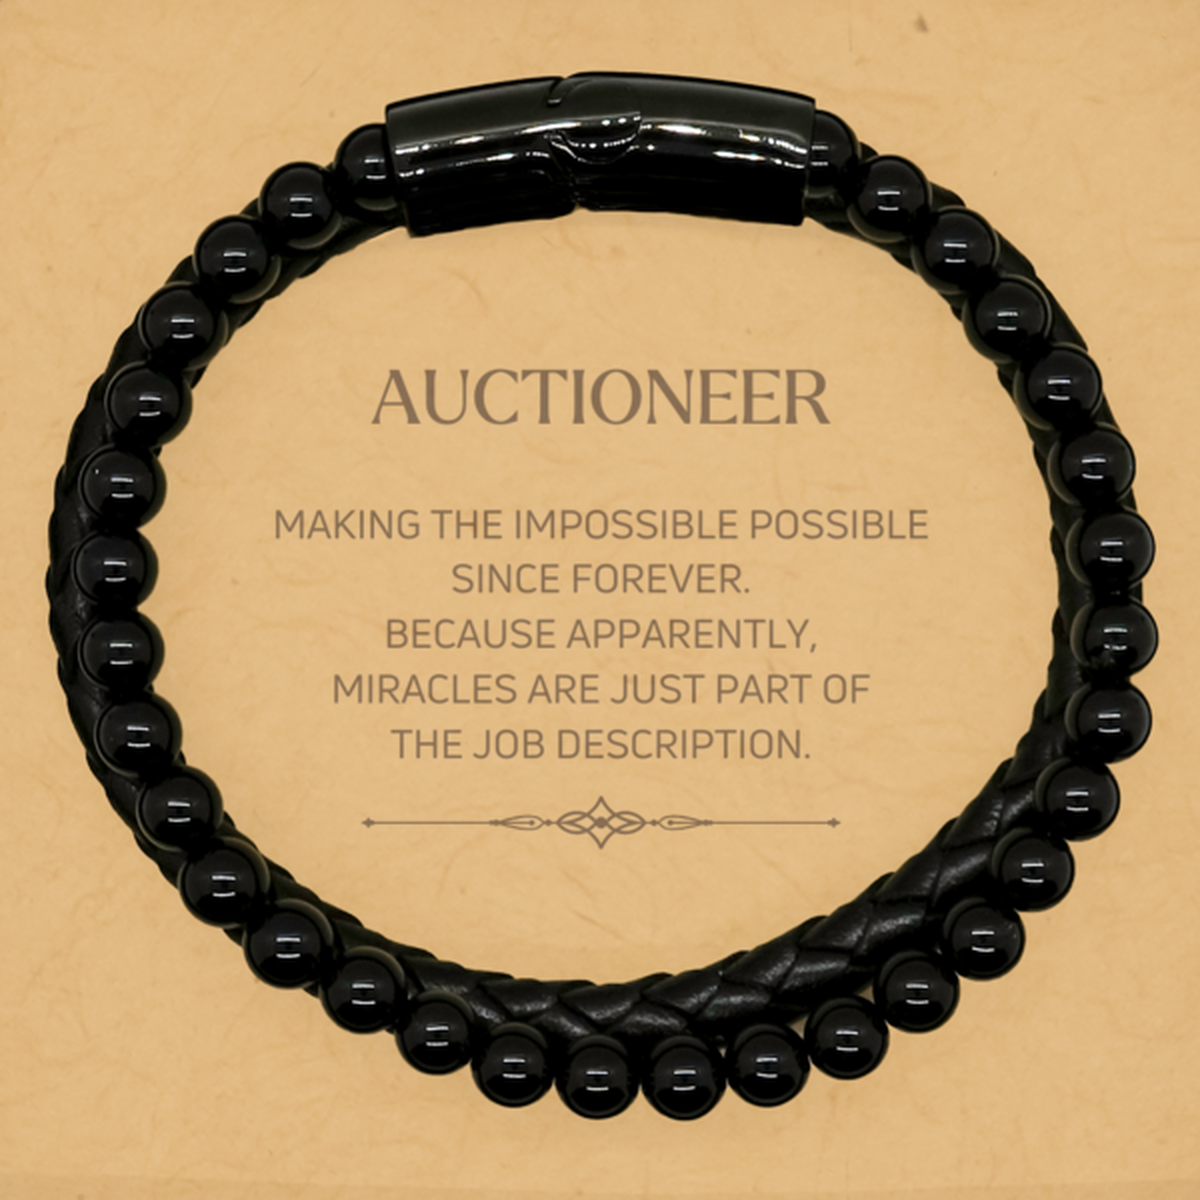 Funny Auctioneer Gifts, Miracles are just part of the job description, Inspirational Birthday Stone Leather Bracelets For Auctioneer, Men, Women, Coworkers, Friends, Boss